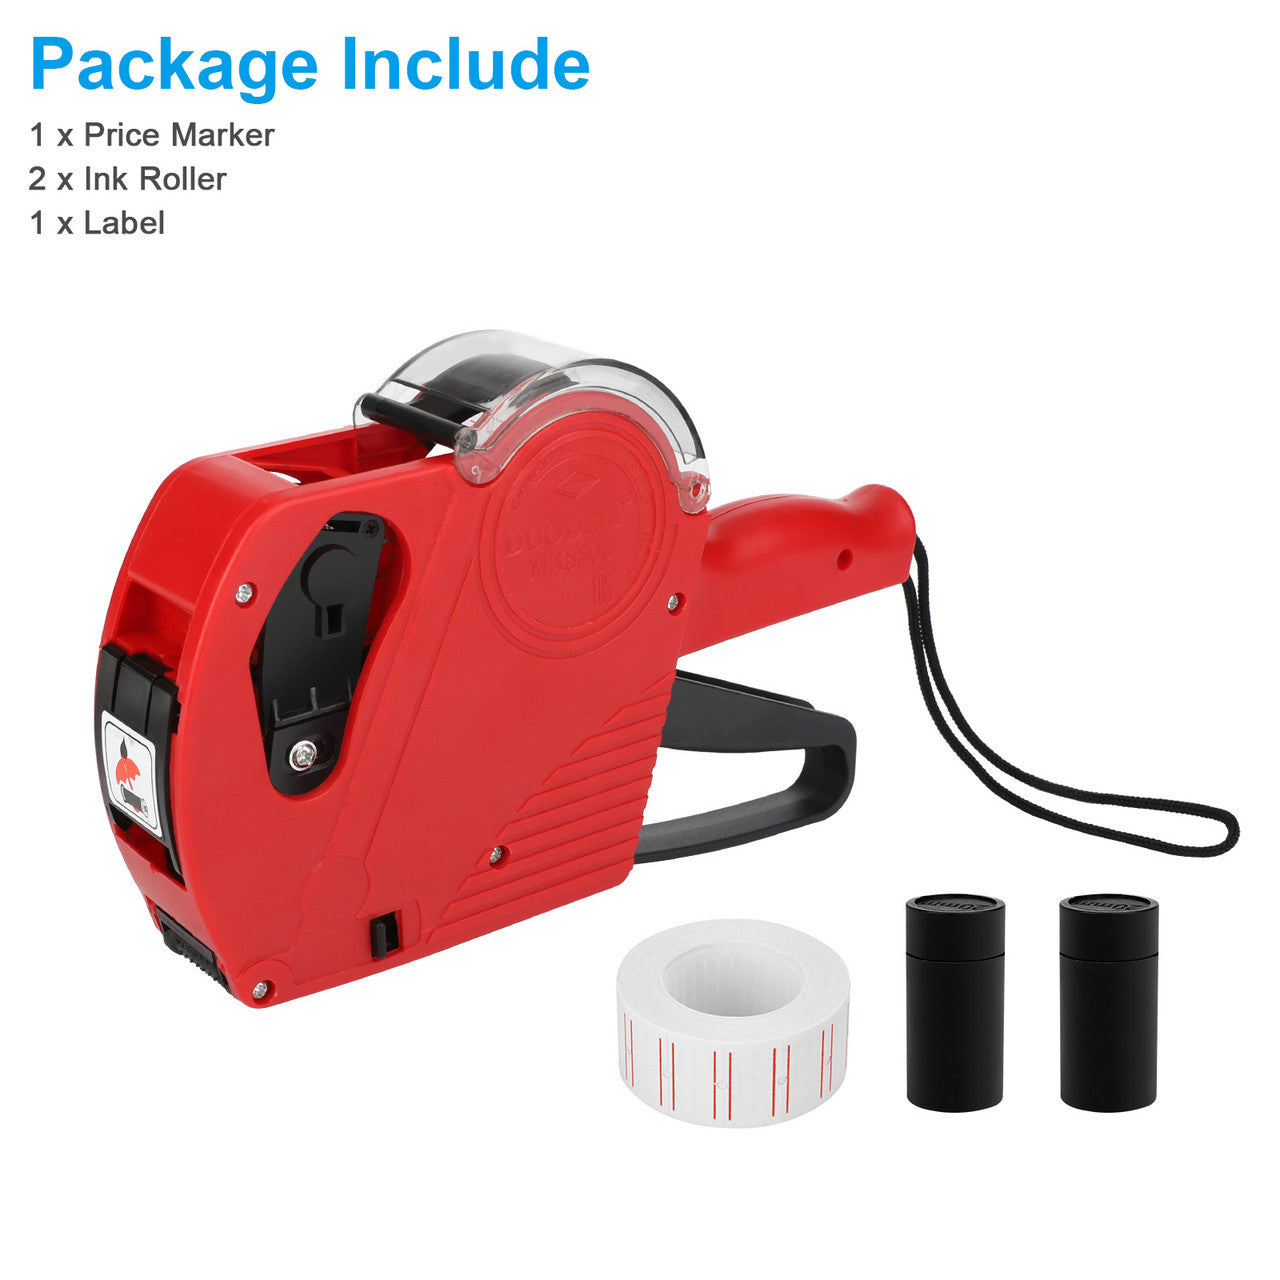 8 Digits Price Tagging Machine With Cover - Single Row printing,use for your small business or retail store (Red)